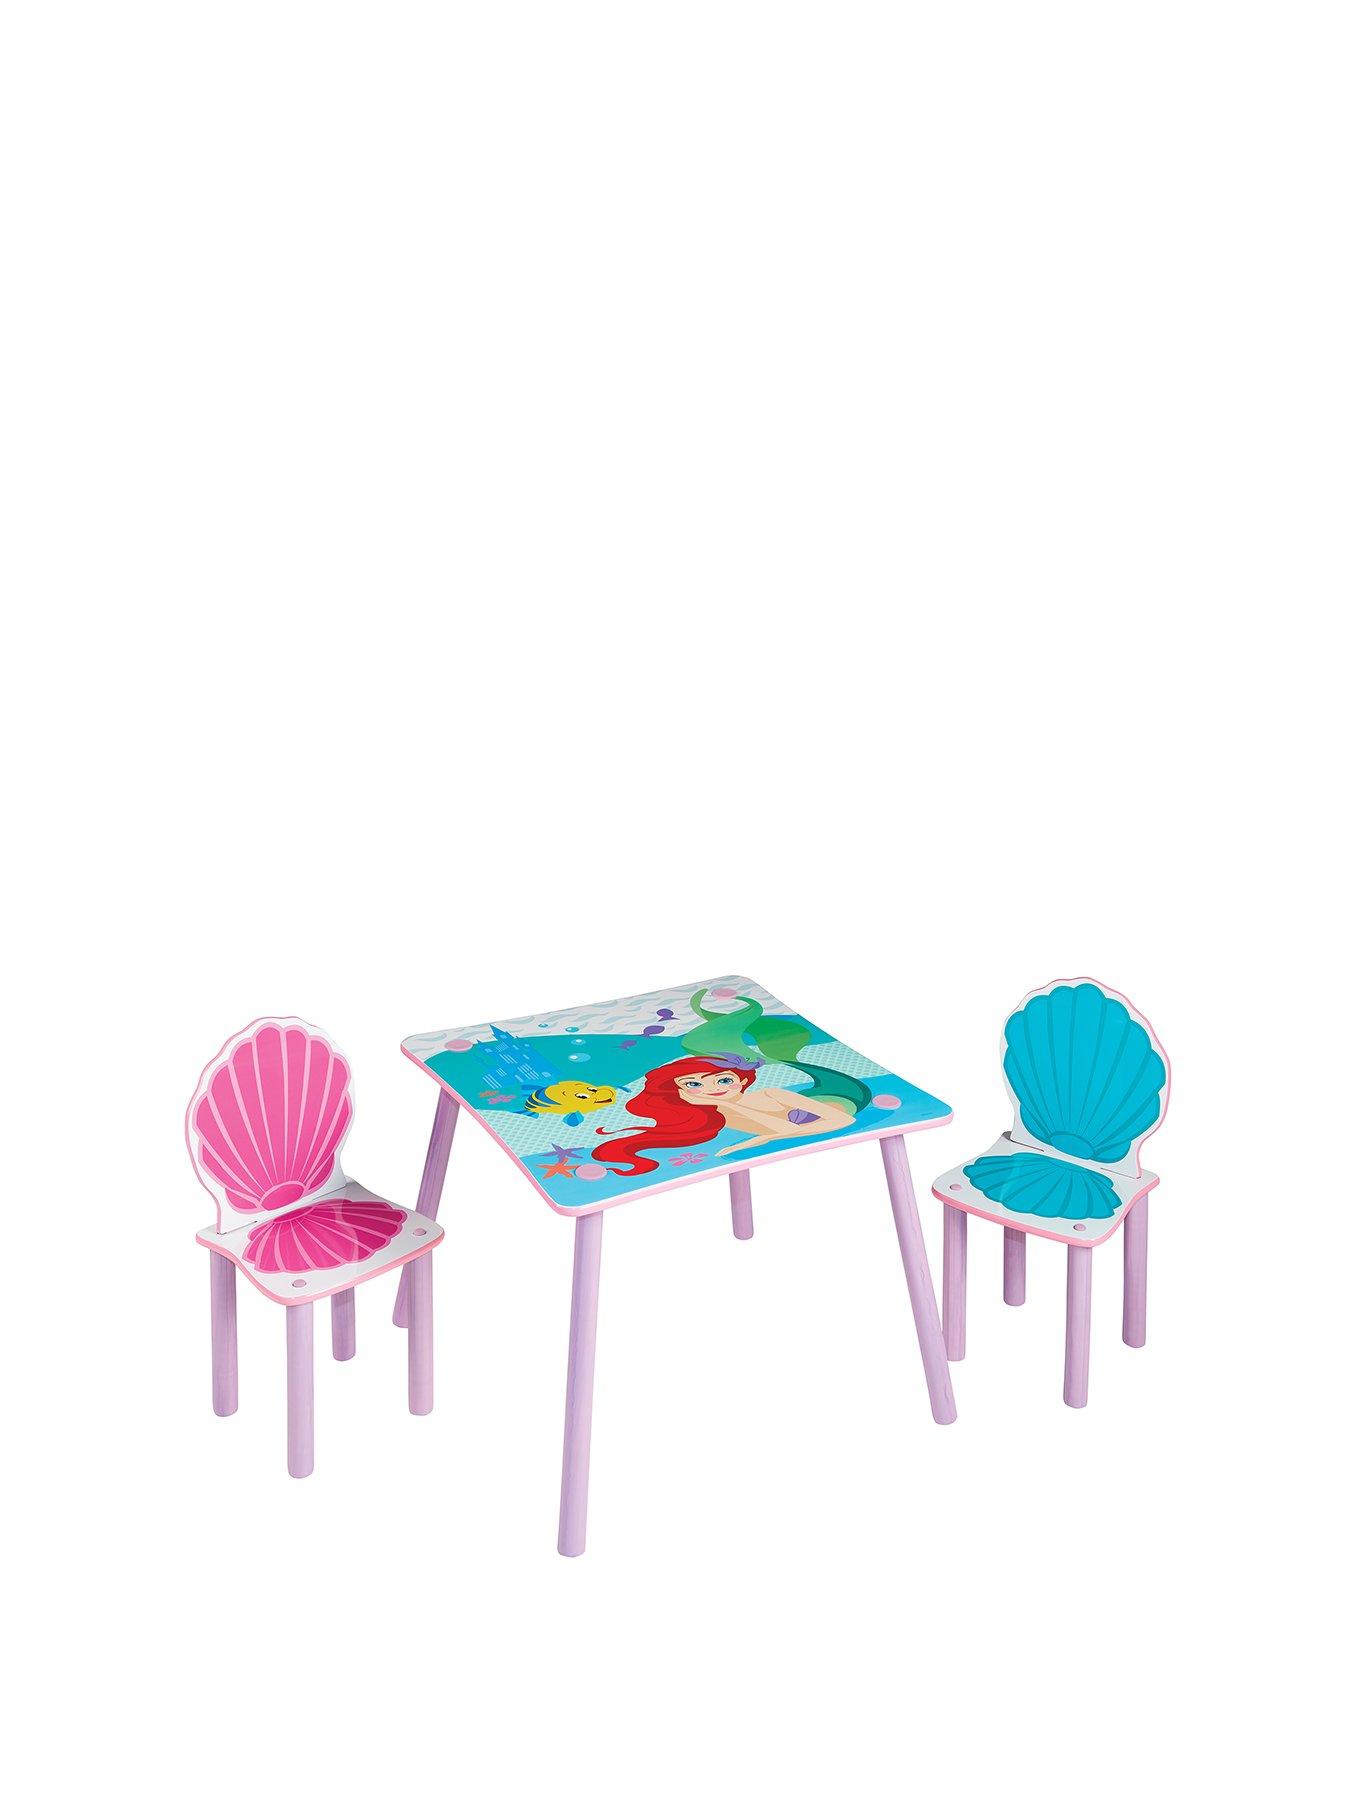 Disney Princess Ariel Kids Table And 2 Chairs By Hellohome Littlewoods Com